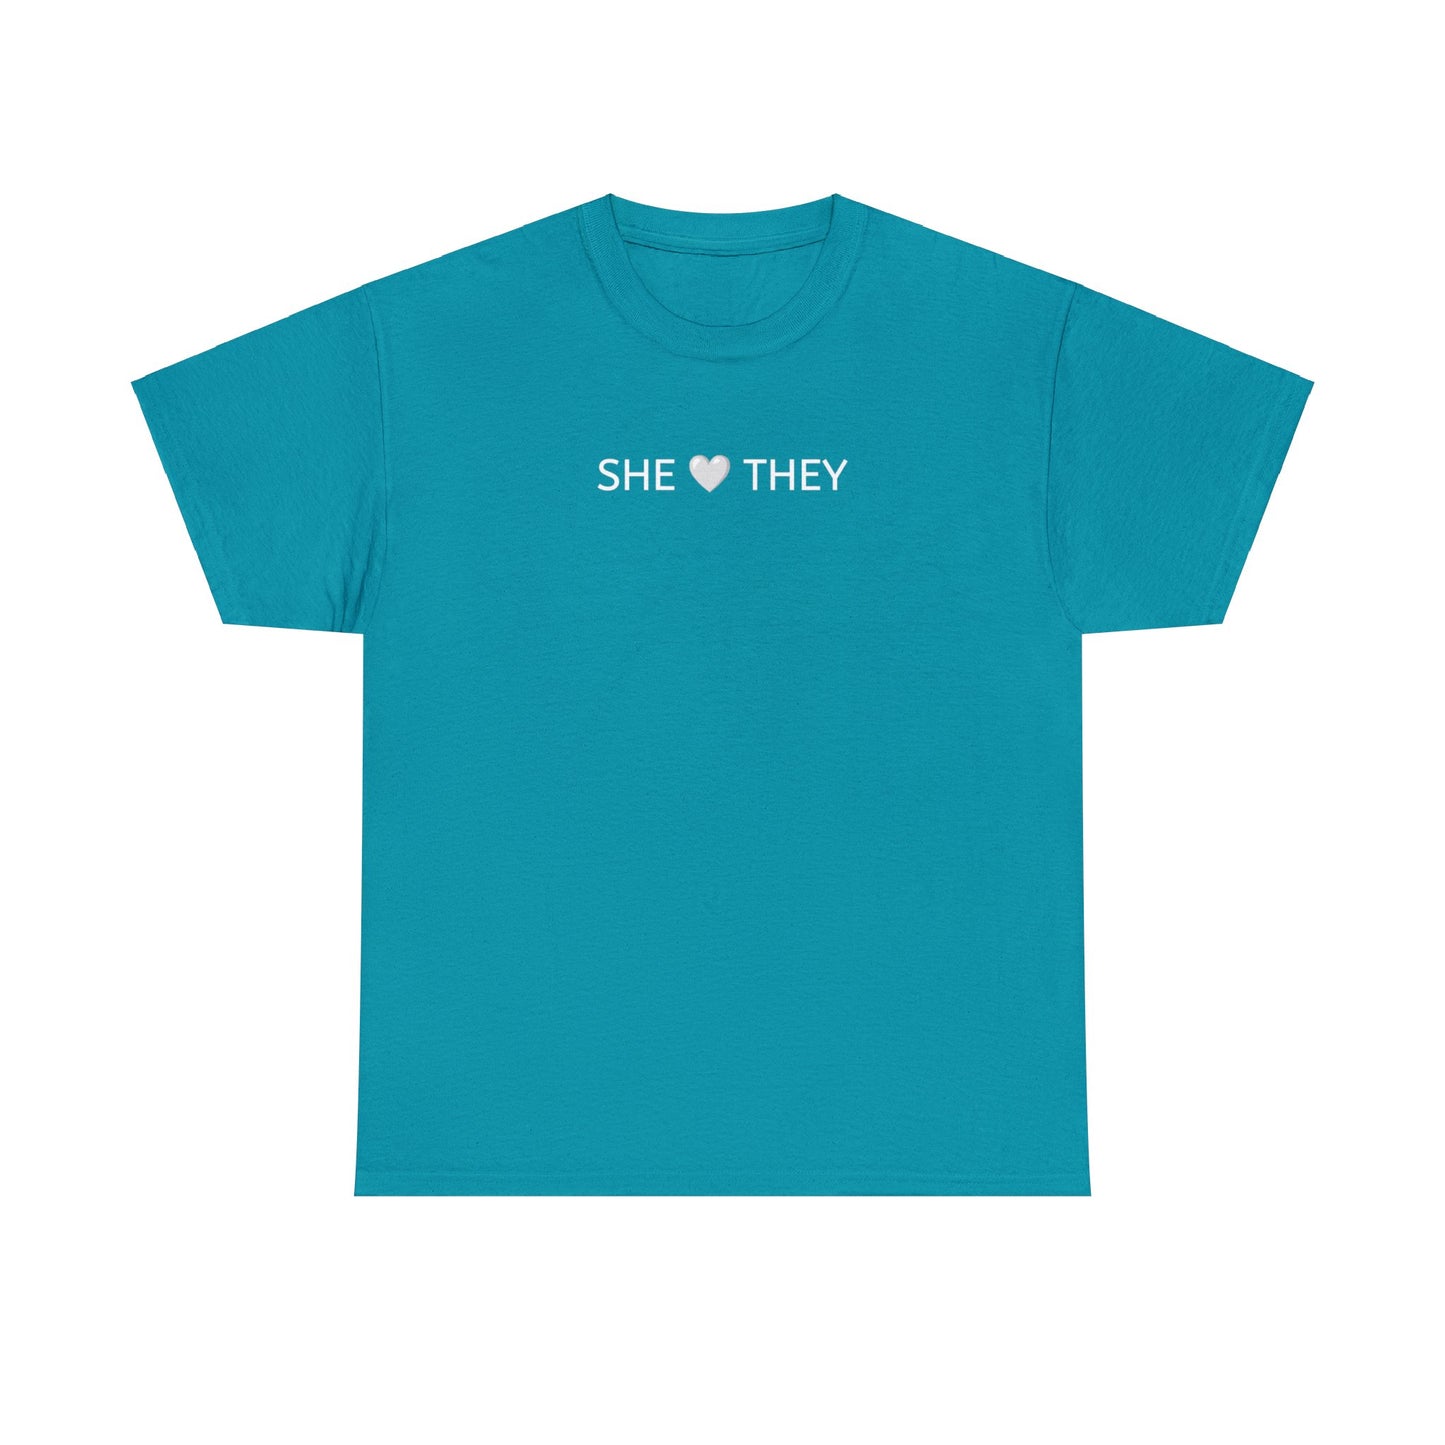 She/They Unisex Cotton Tee